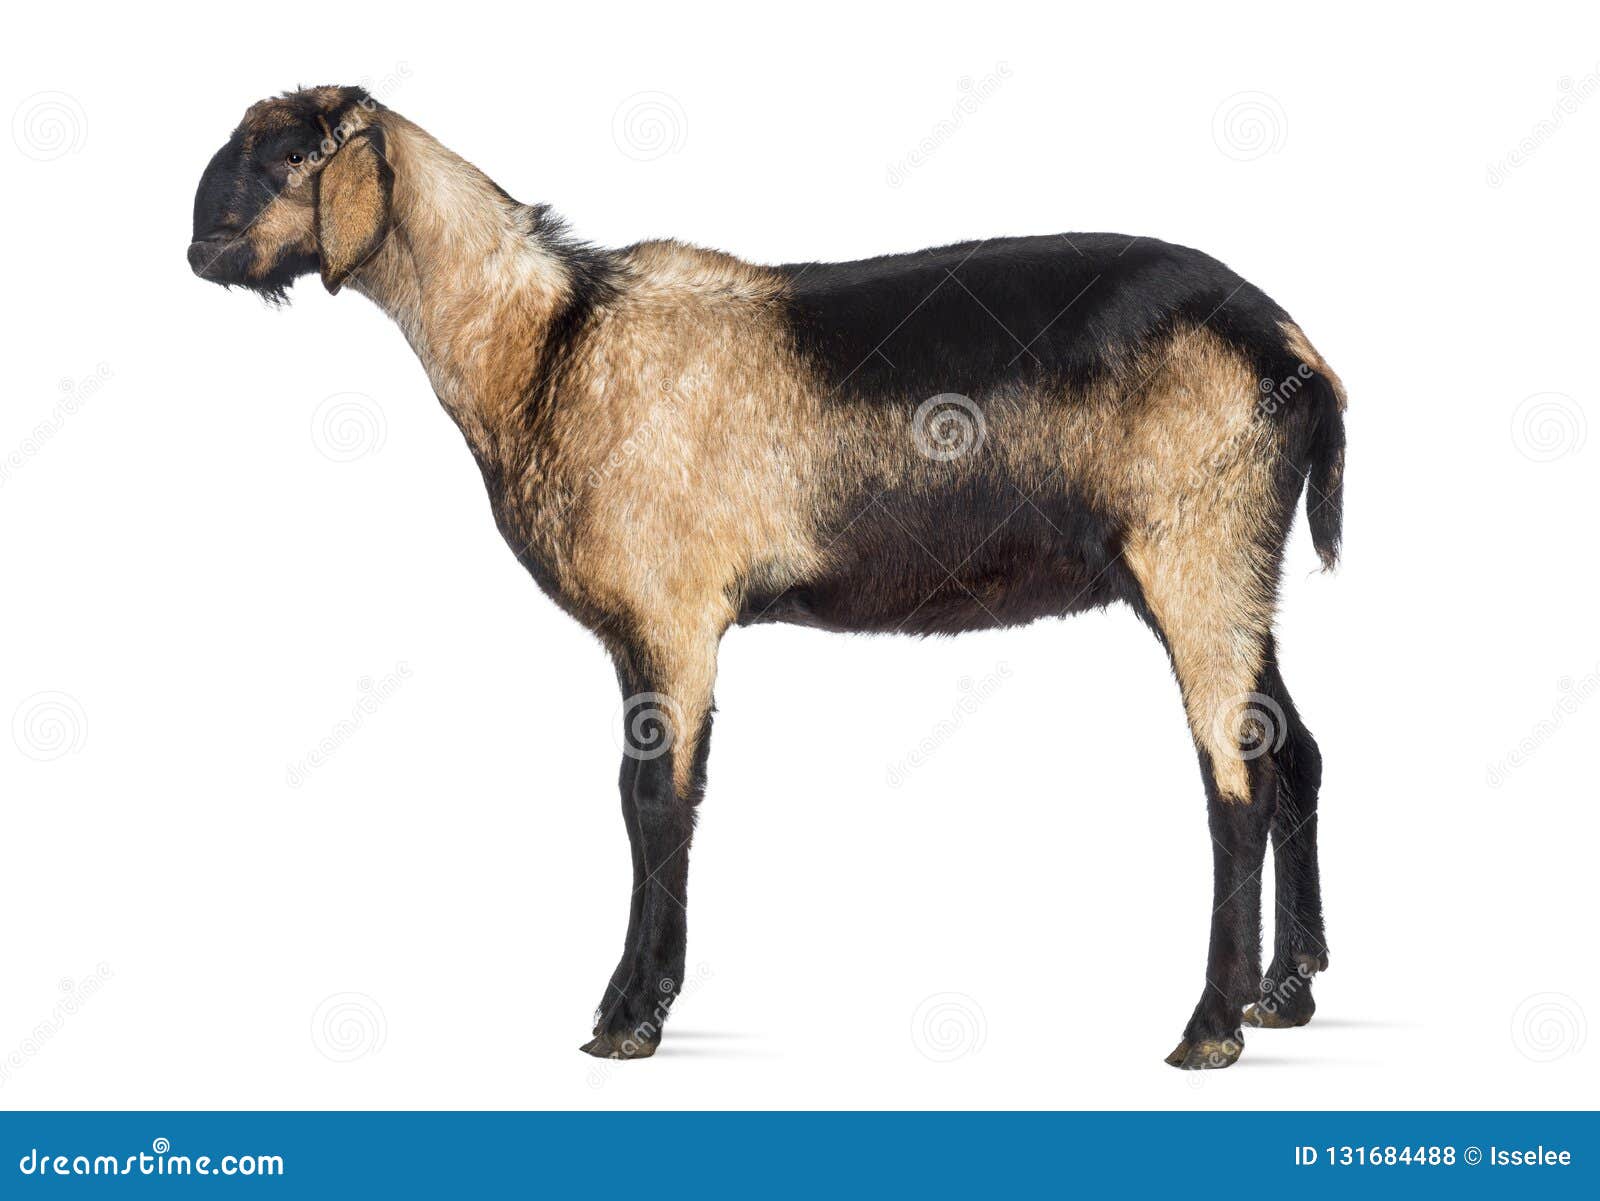 side view of an anglo-nubian goat with a distorted jaw against white background